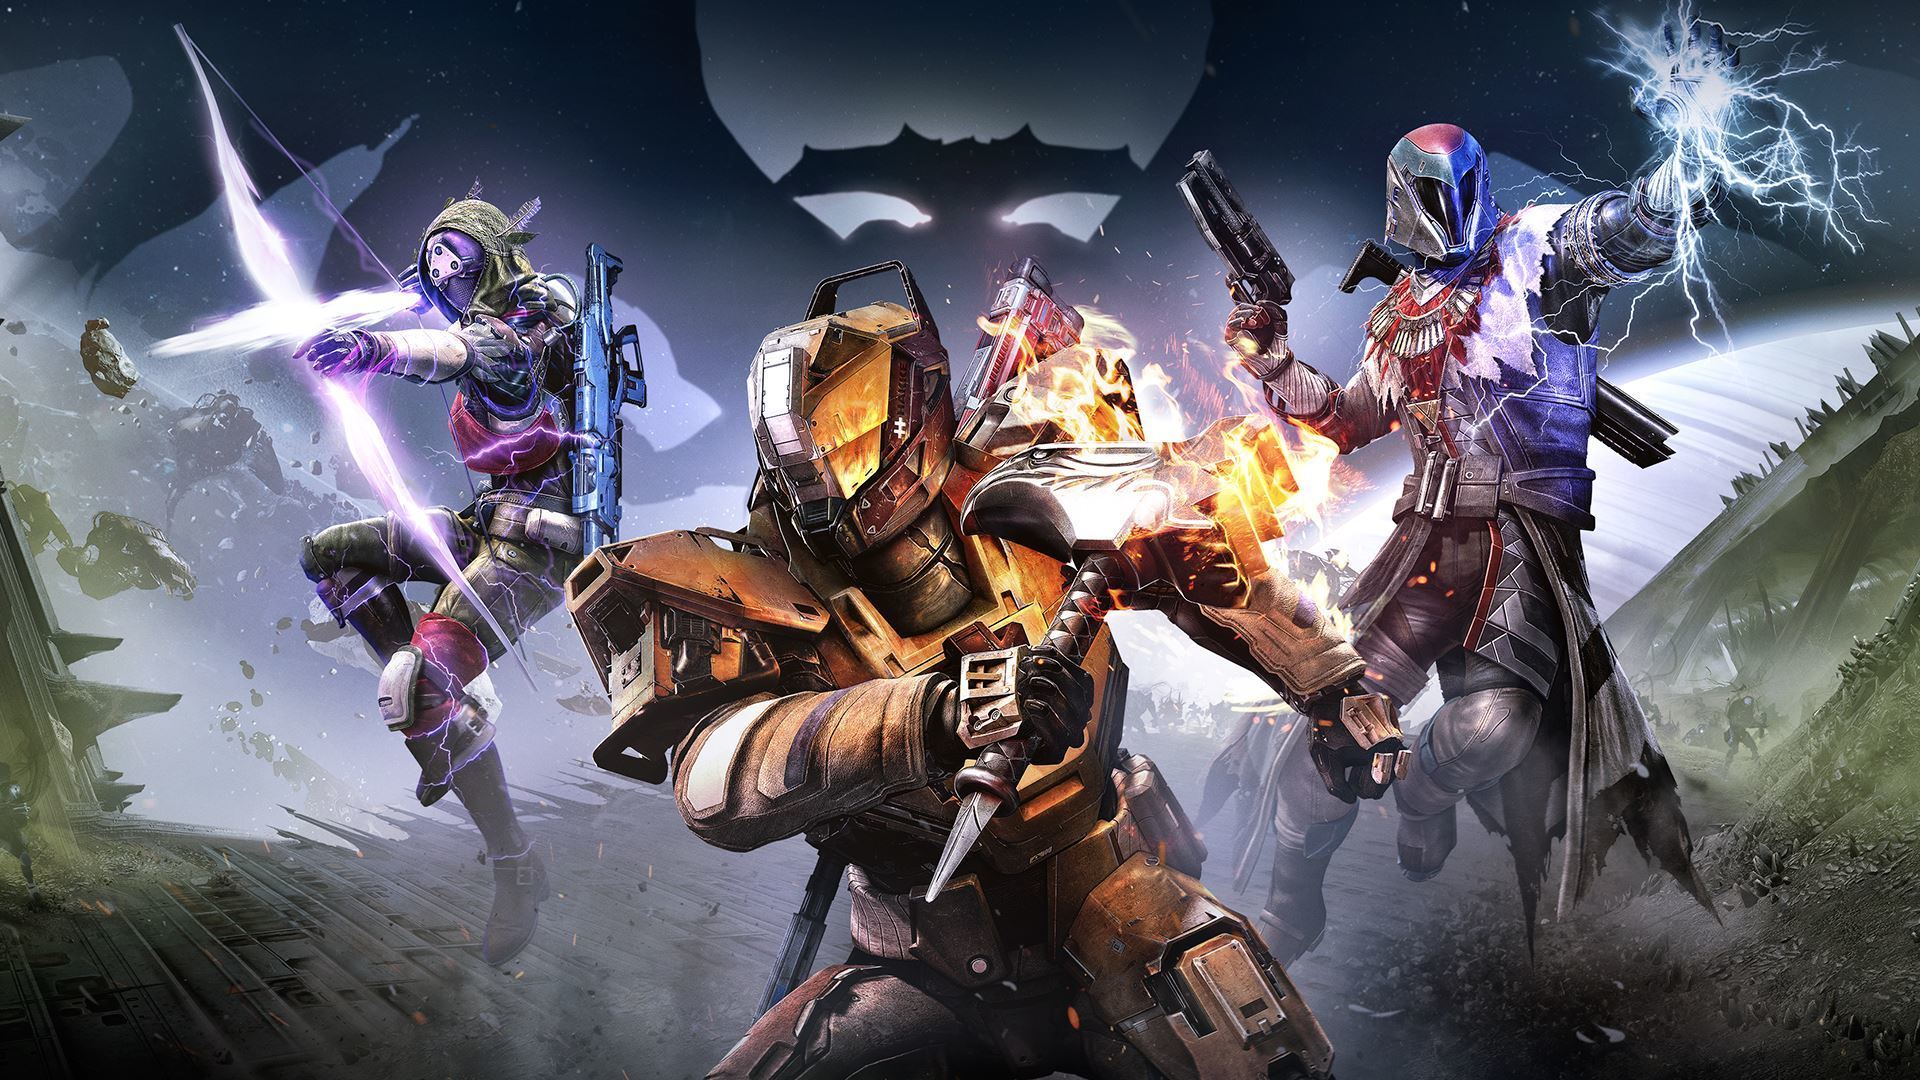  destiny bungie software activision bungie wallpapers photos 1920x1080